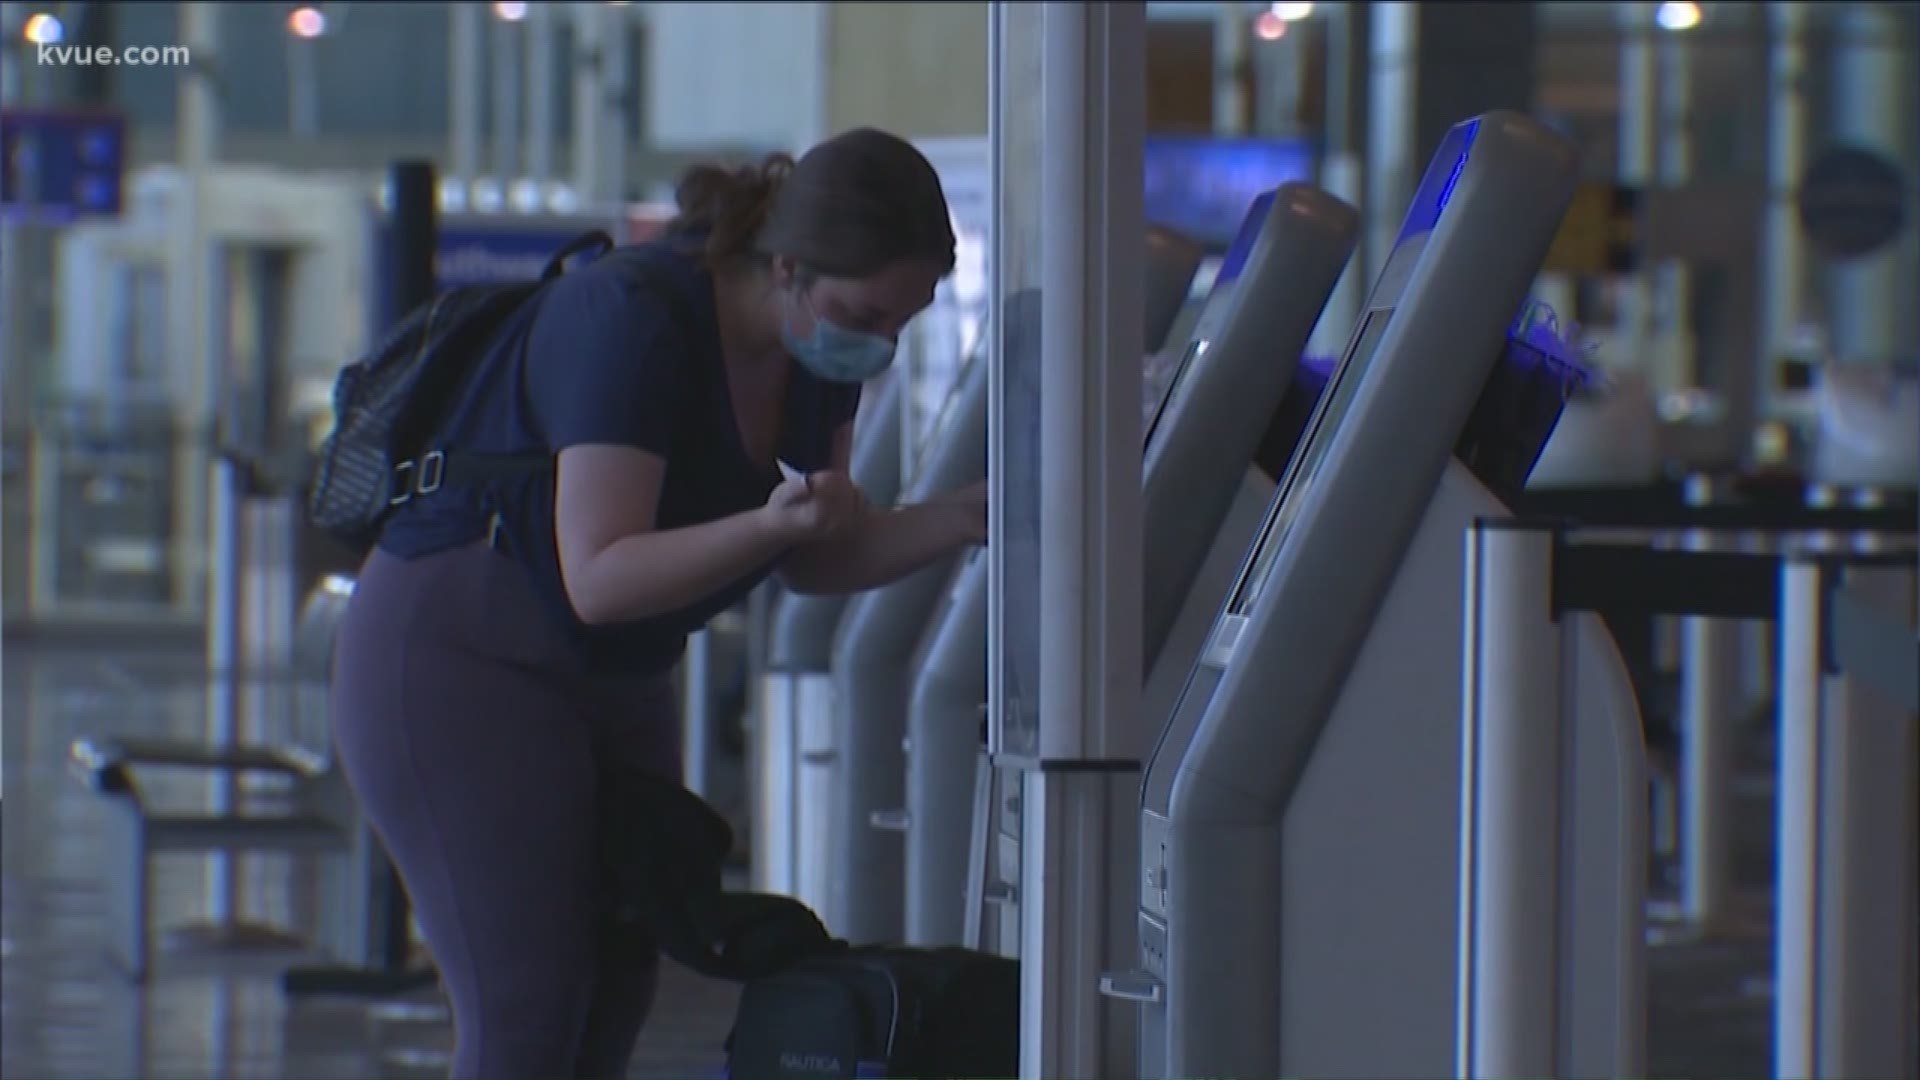 State troopers have been positioned at airports and on roads to keep coronavirus from spreading when people travel to Texas from certain locations.